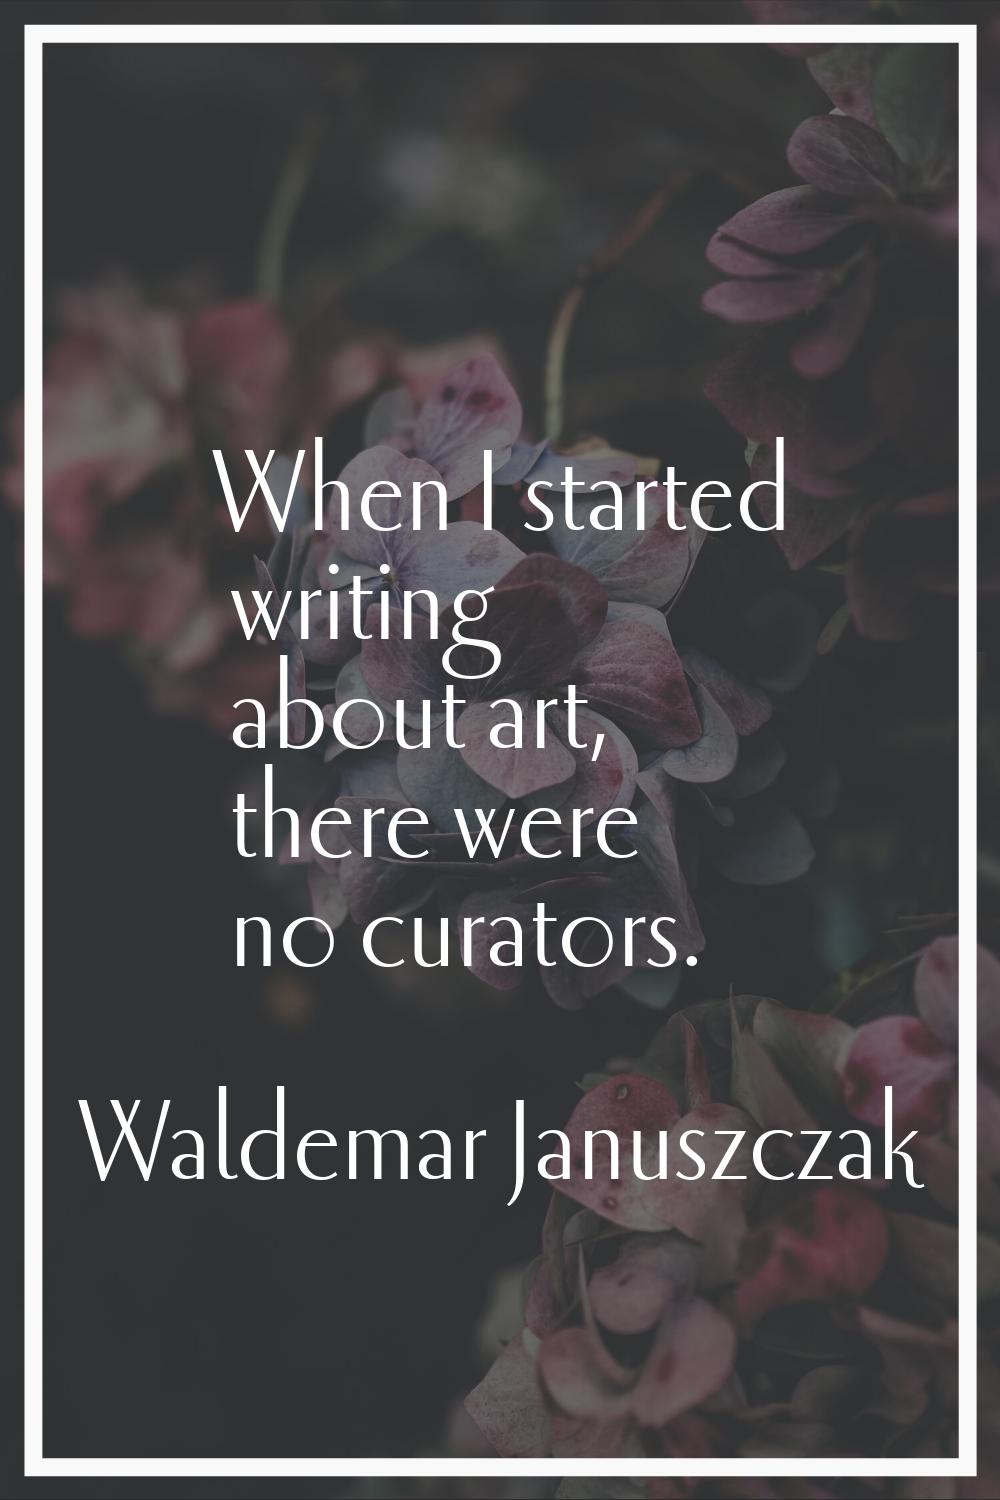 When I started writing about art, there were no curators.